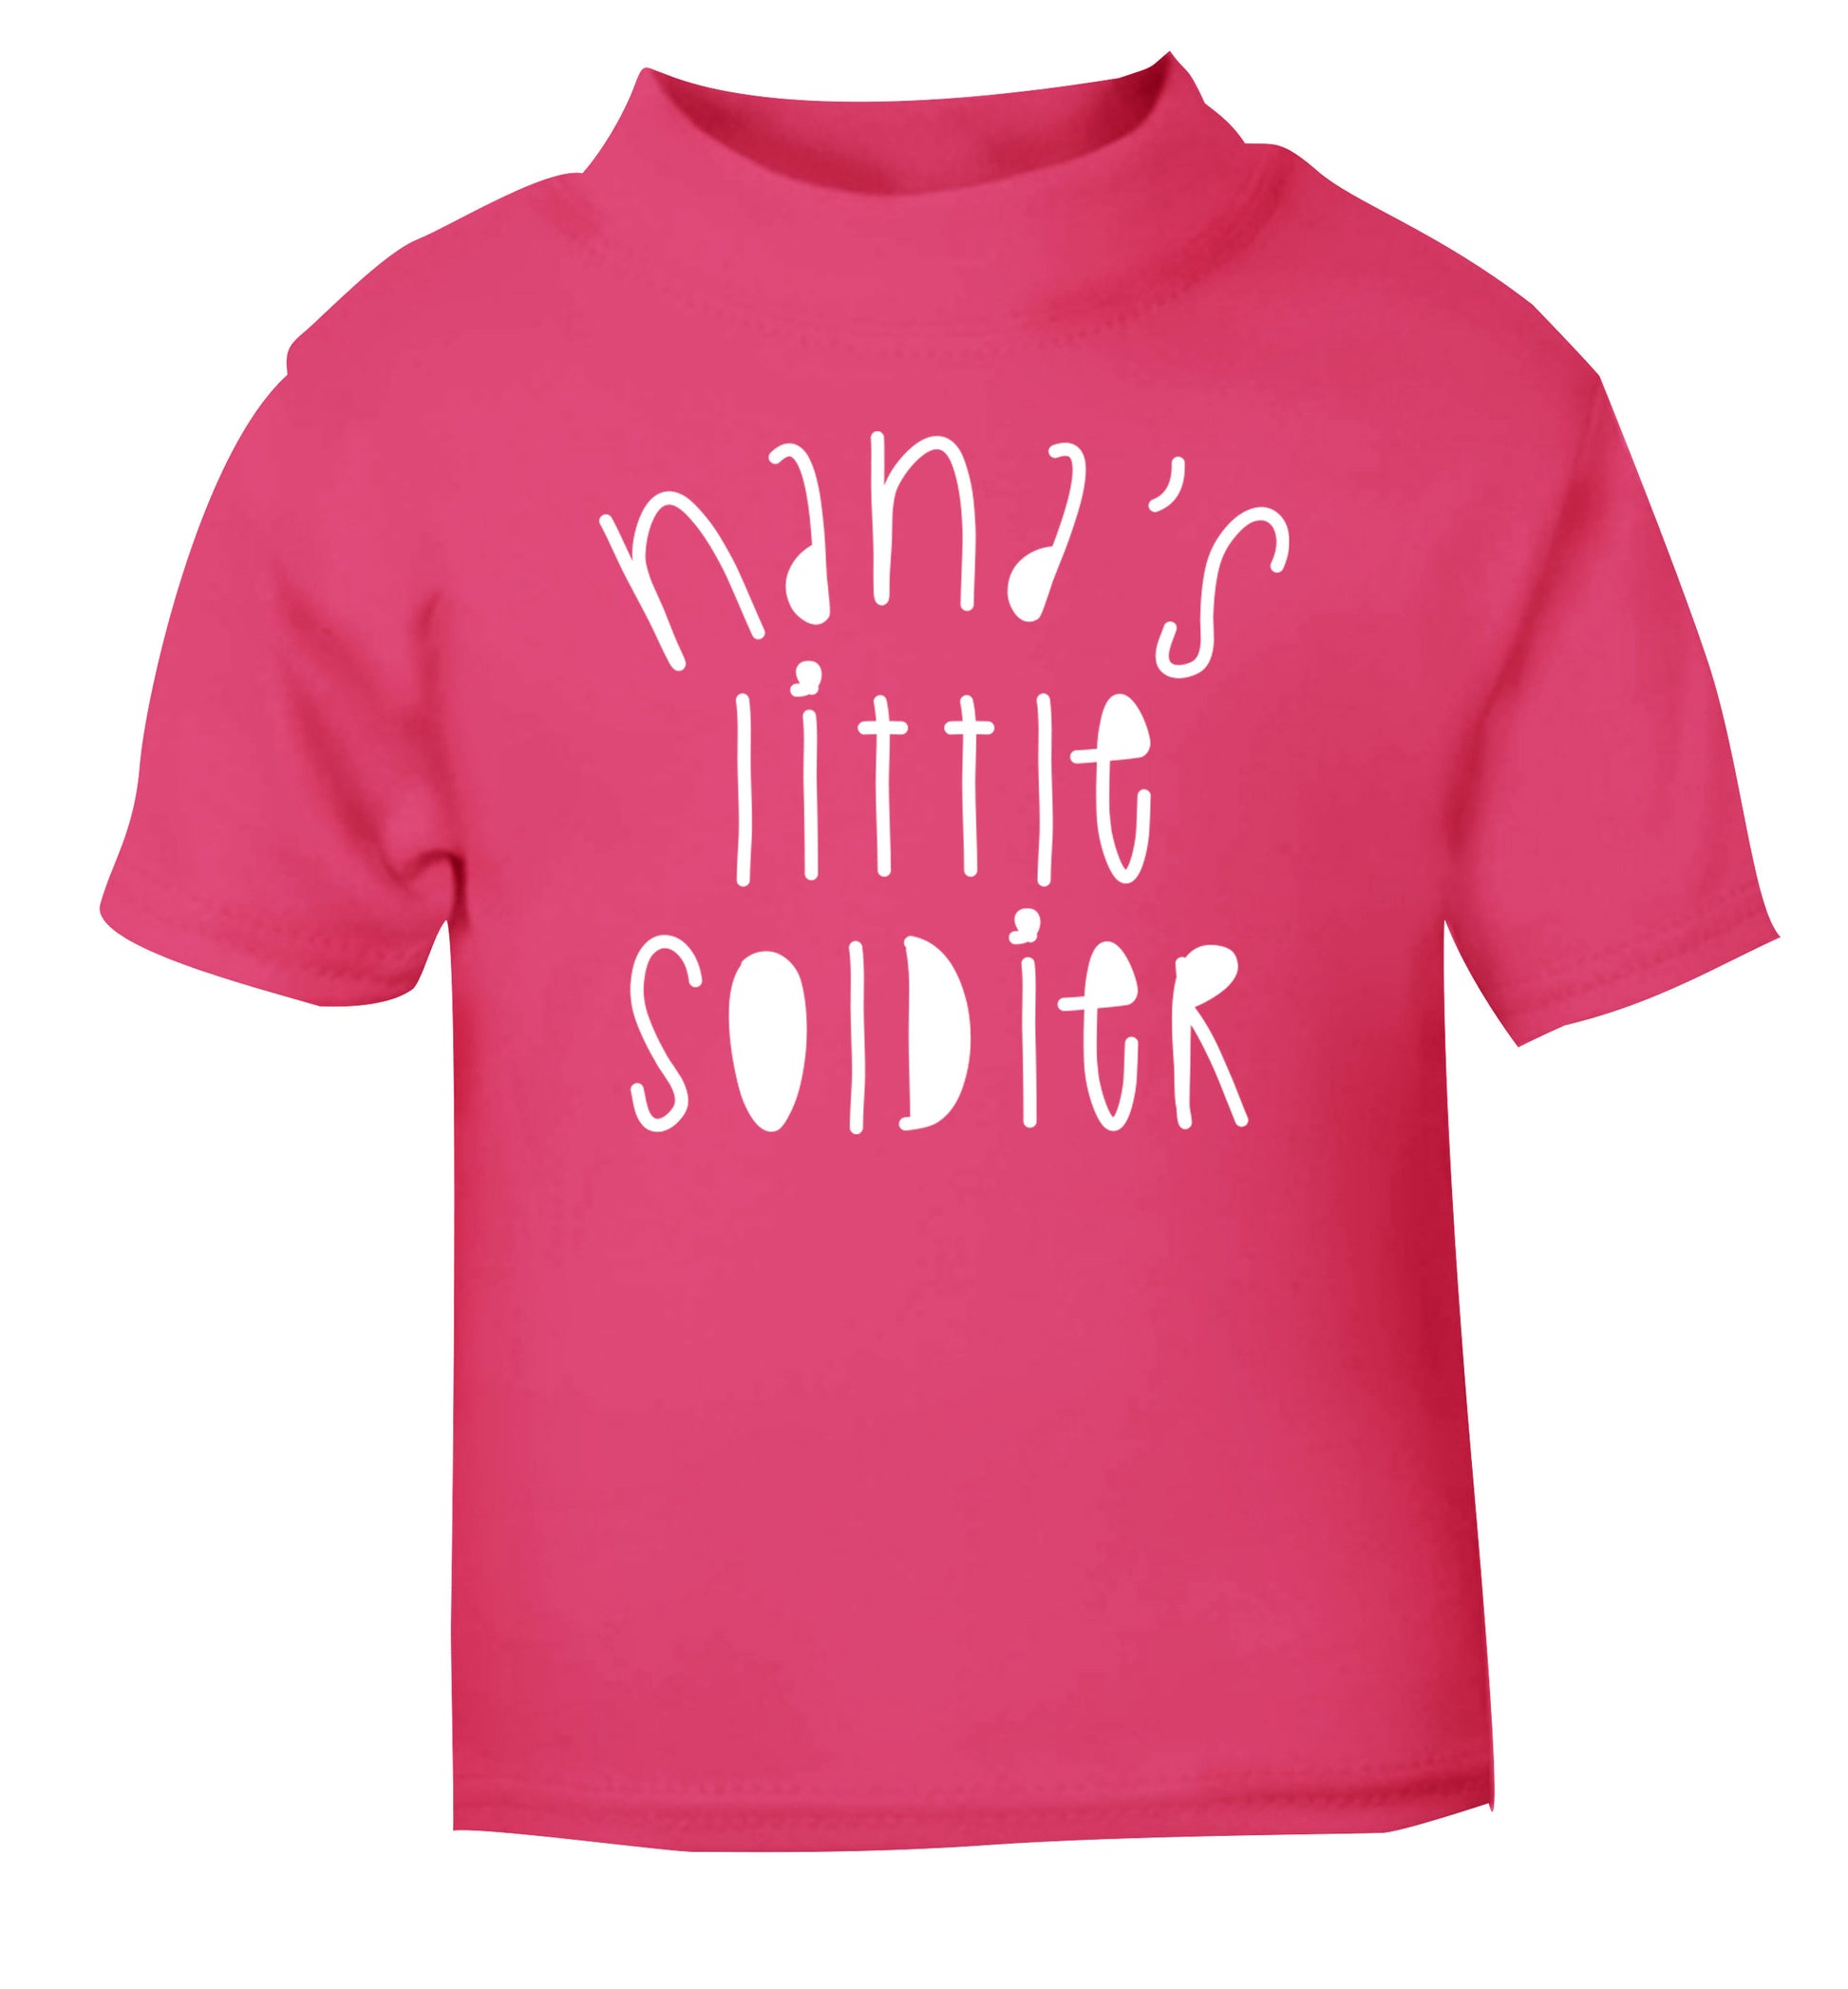 Nana's little soldier pink Baby Toddler Tshirt 2 Years